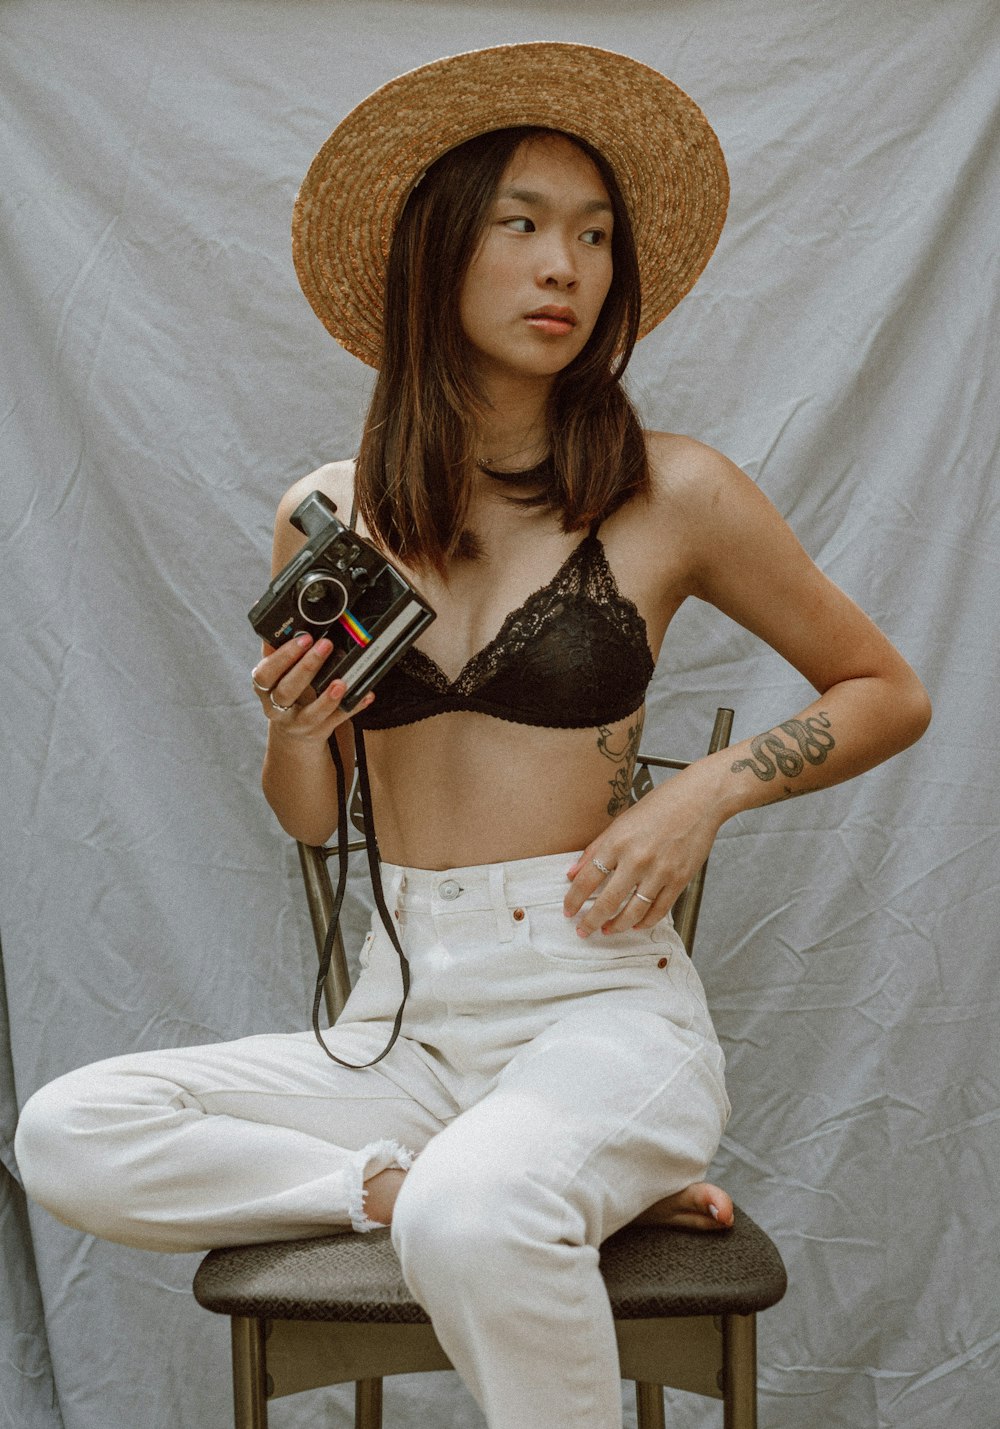 woman in black brassiere and white pants holding black and silver camera